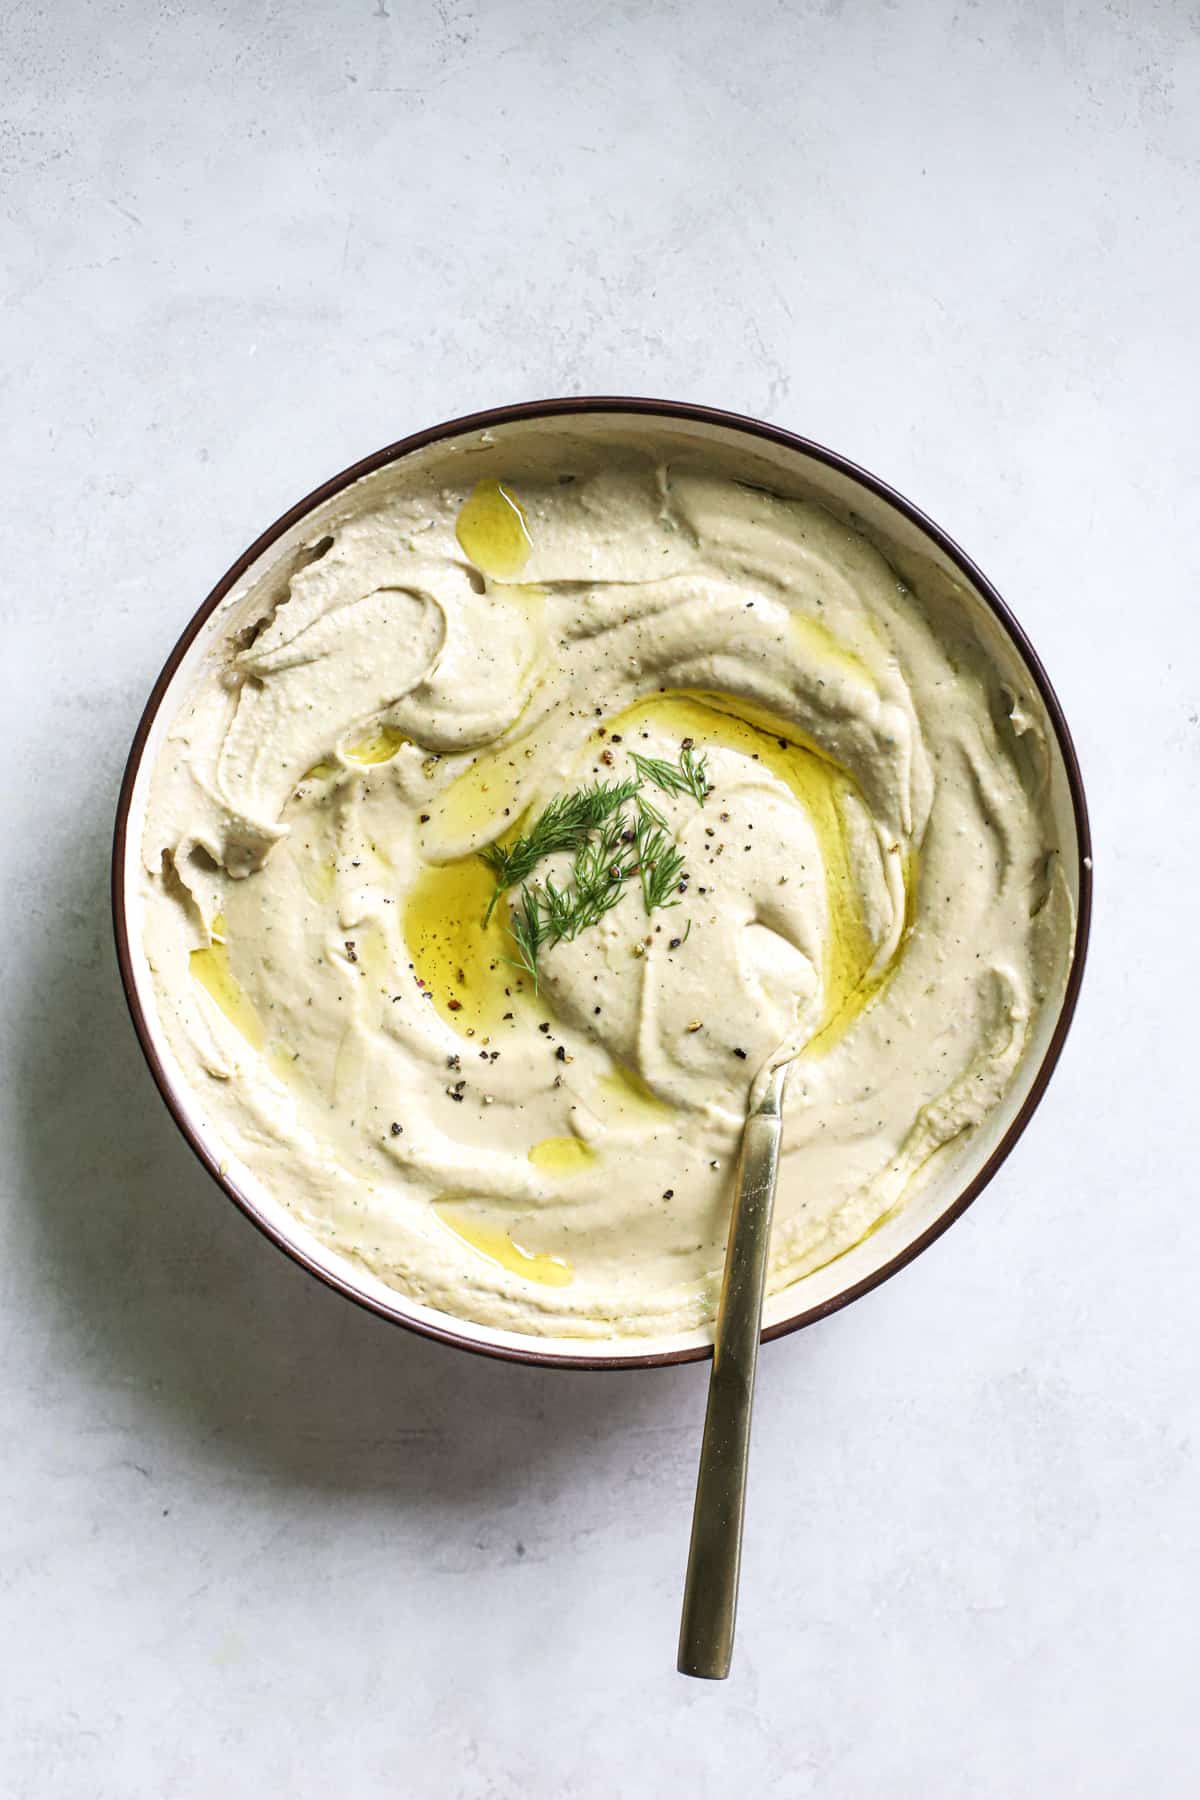 Lemon dill hummus in beige serving dish with olive oil drizzled on top, with golden spoon